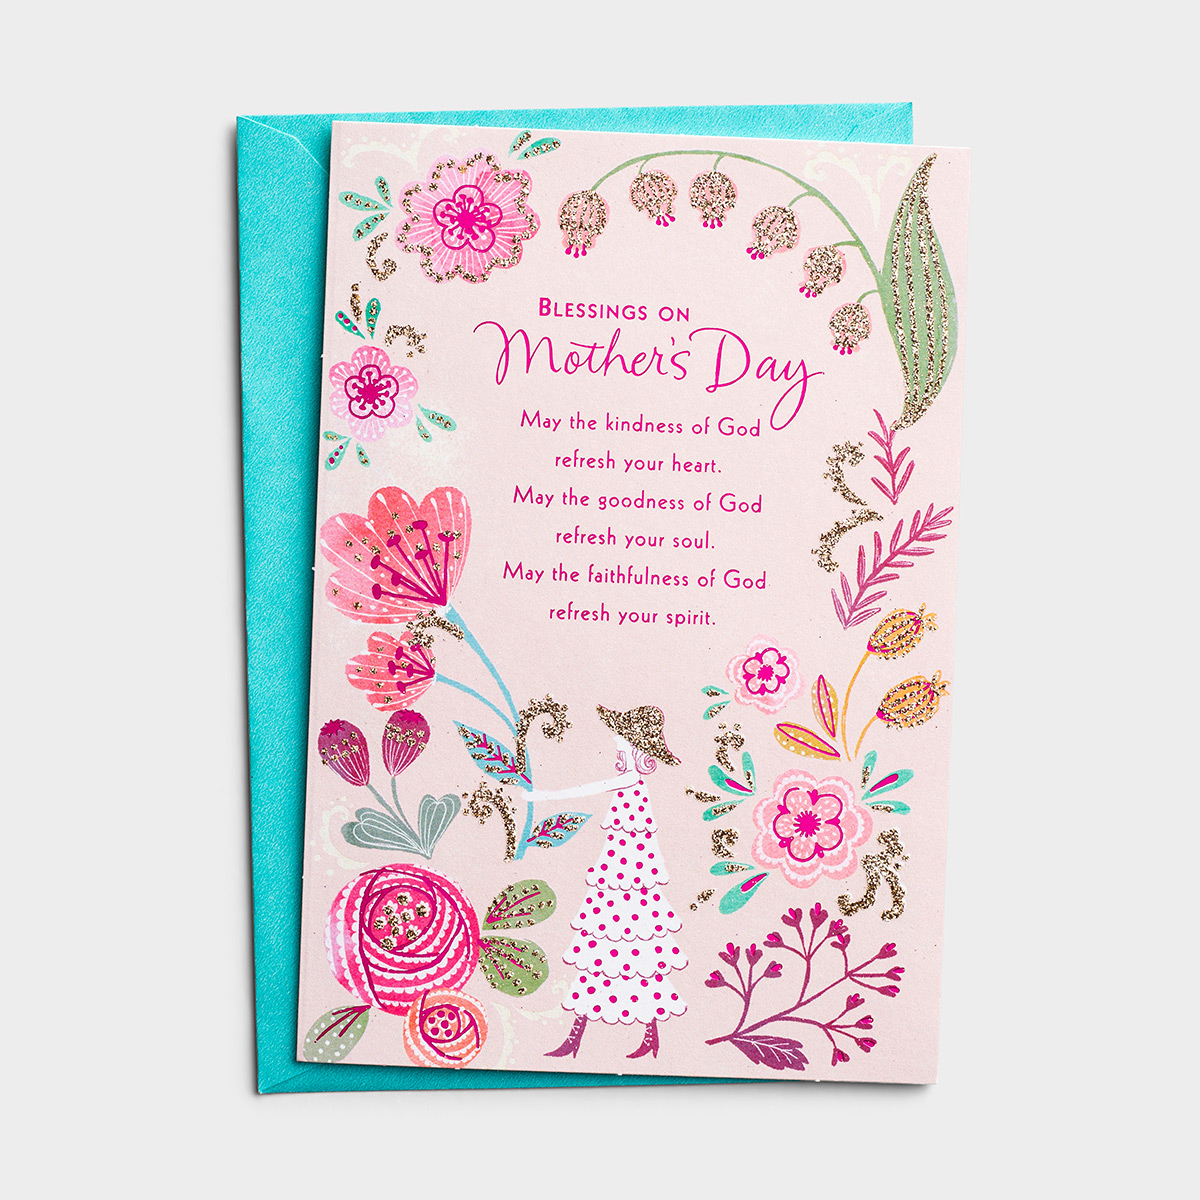 Mother's Day - Blessings on Mother's Day - 3 Premium Cards